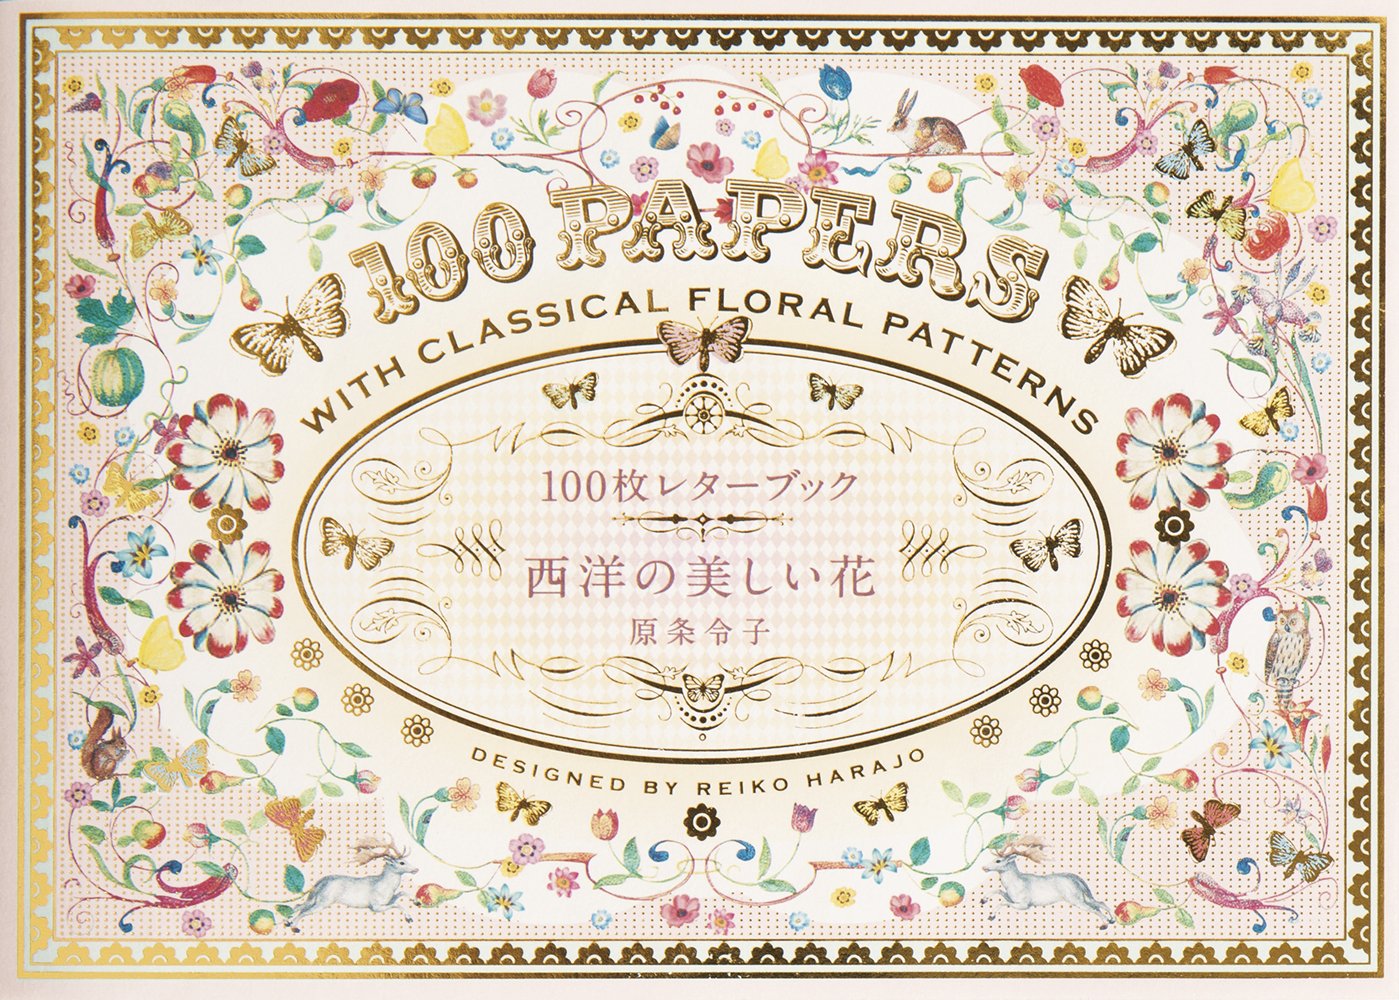 100 Papers With Classical Floral Patterns cover